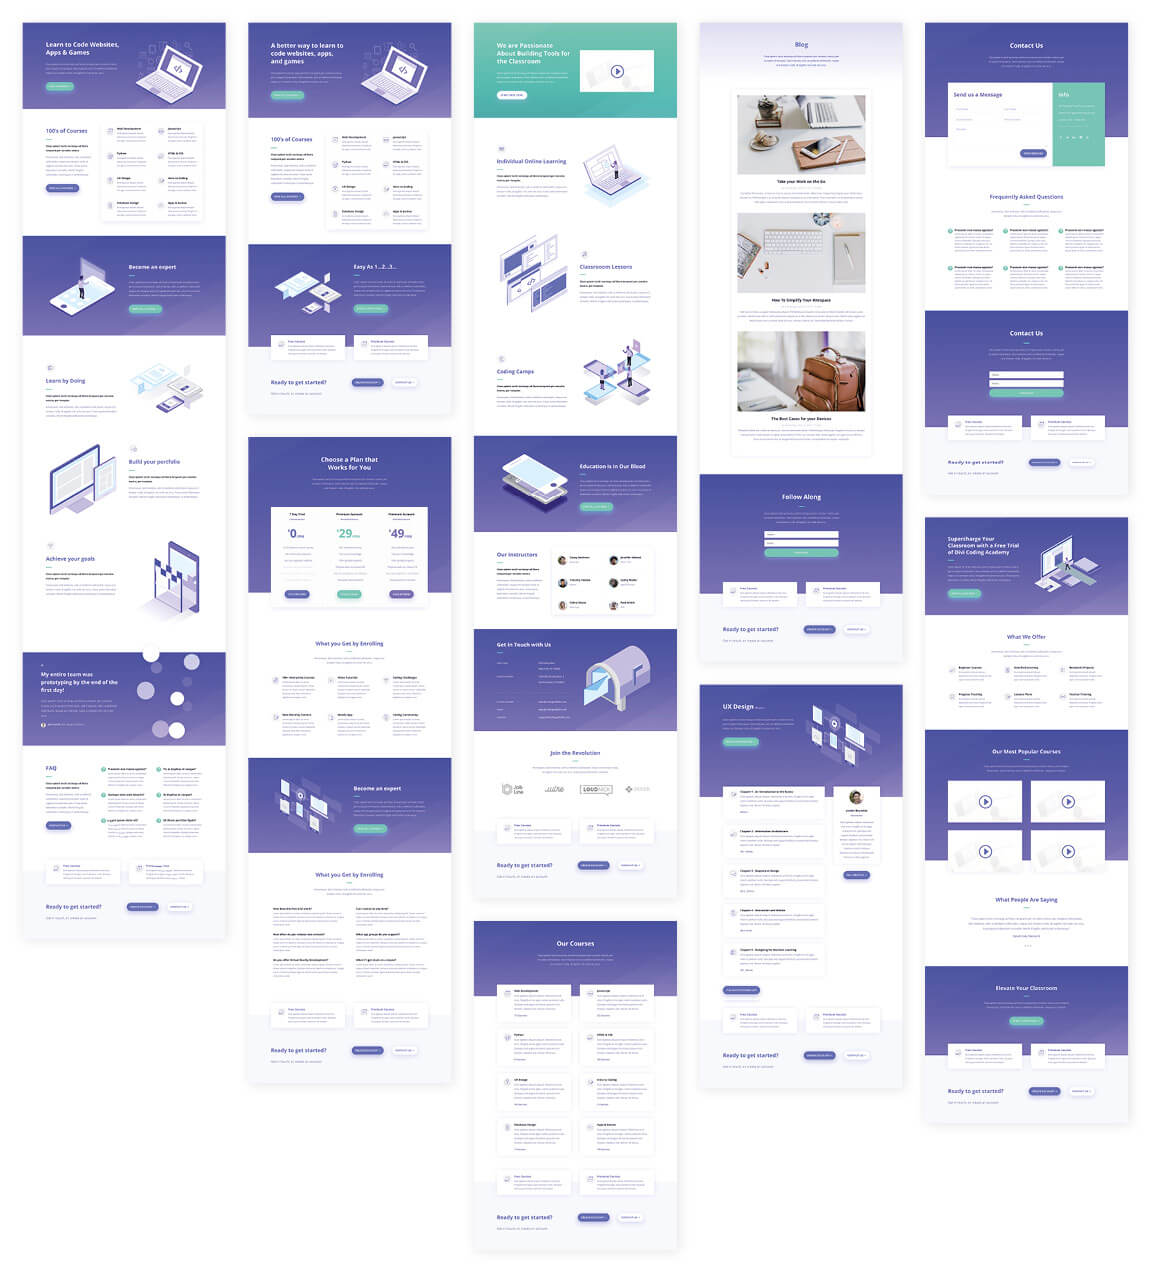 Free LMS Layout Pack Website Template for Divi